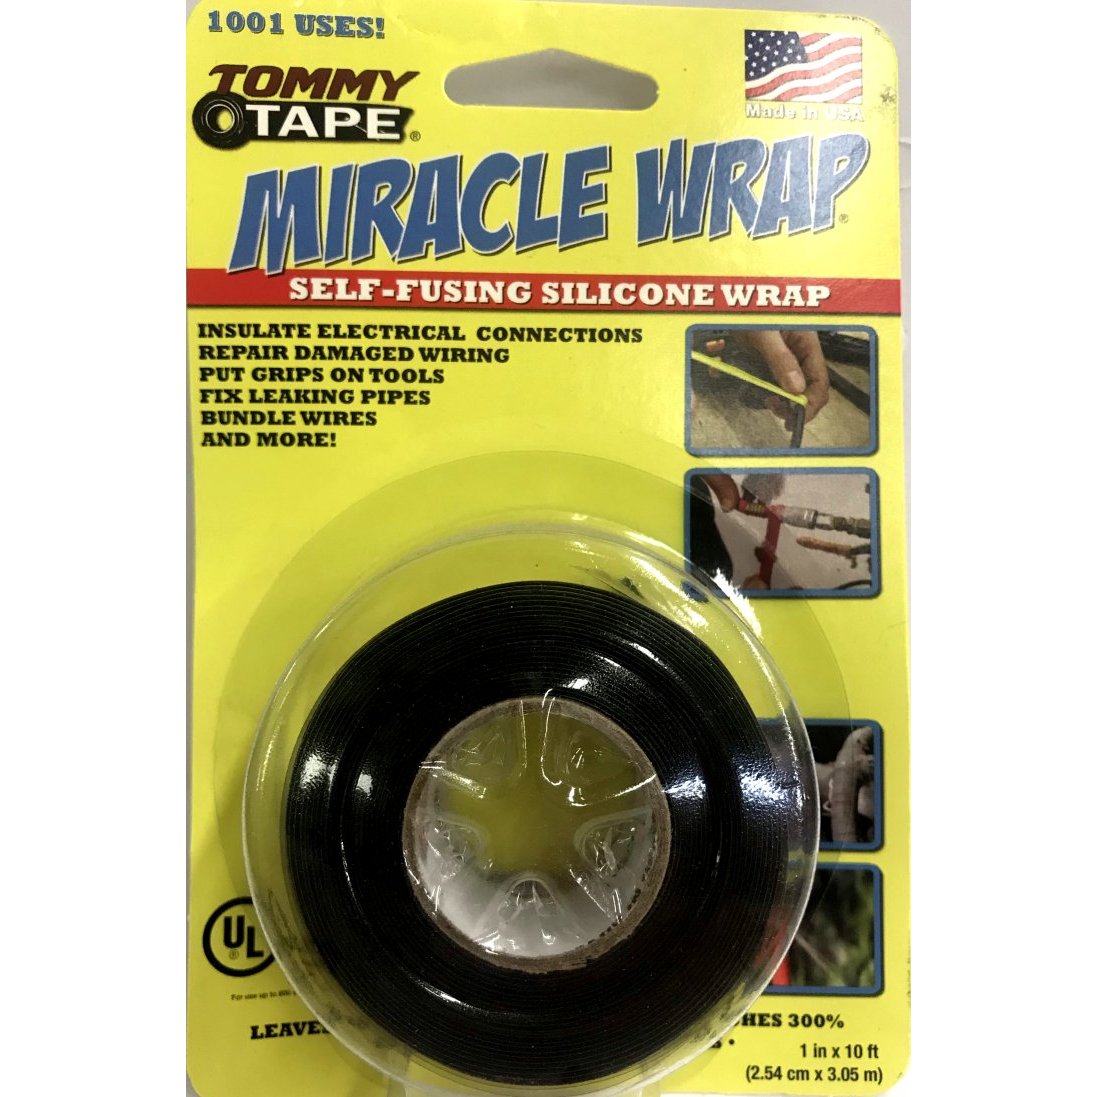 MIRACLE WRAP TAPE SILICONE